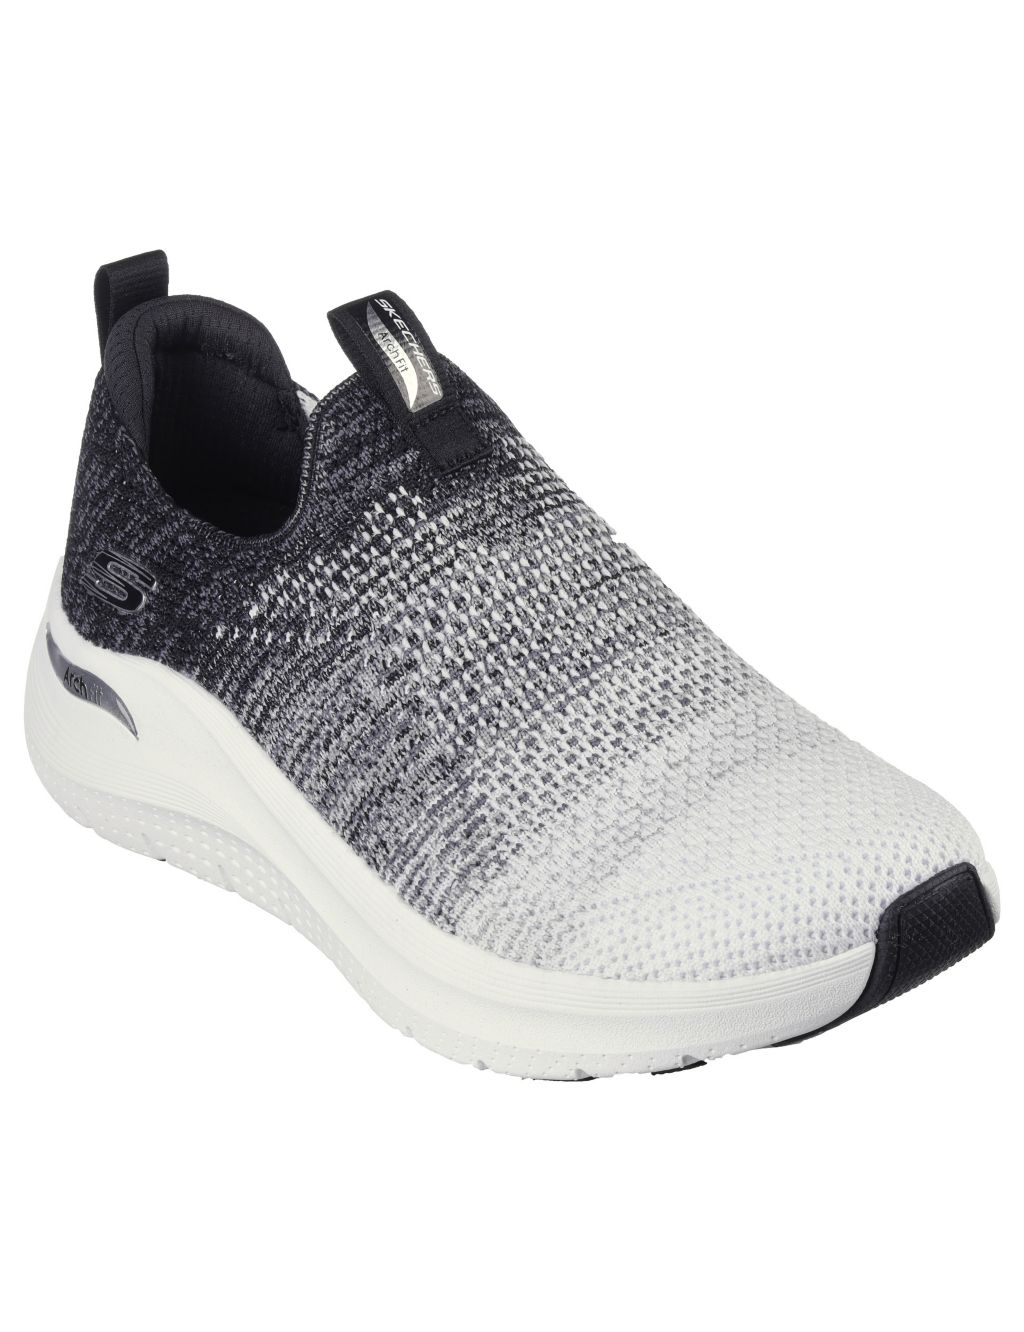 Arch Fit 2.0 Slip On Trainers image 2